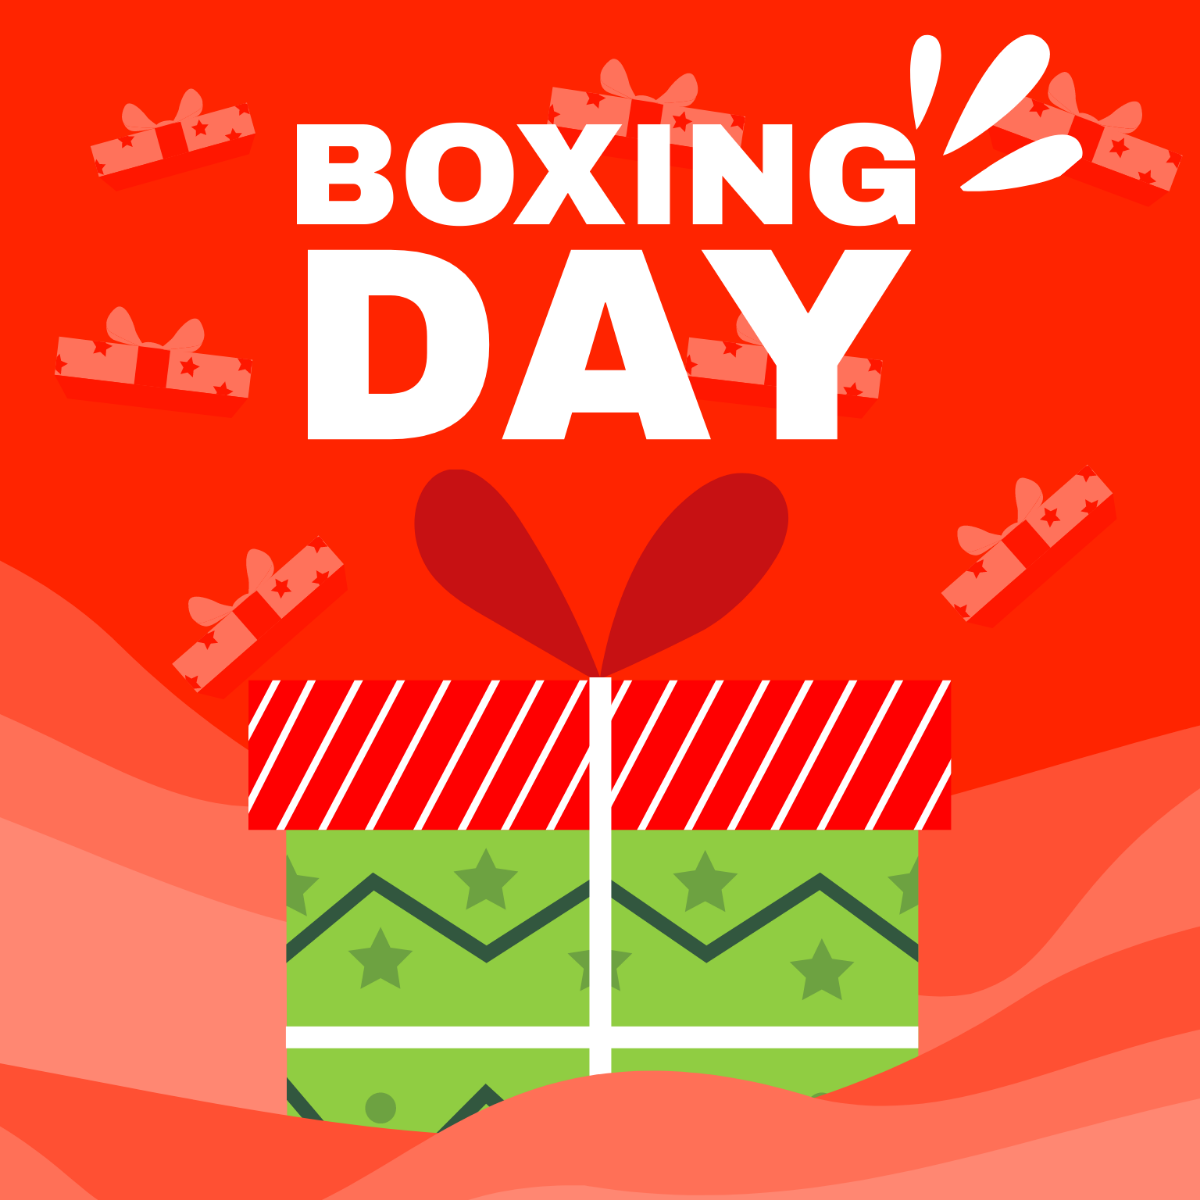 Boxing Day Illustrator Template